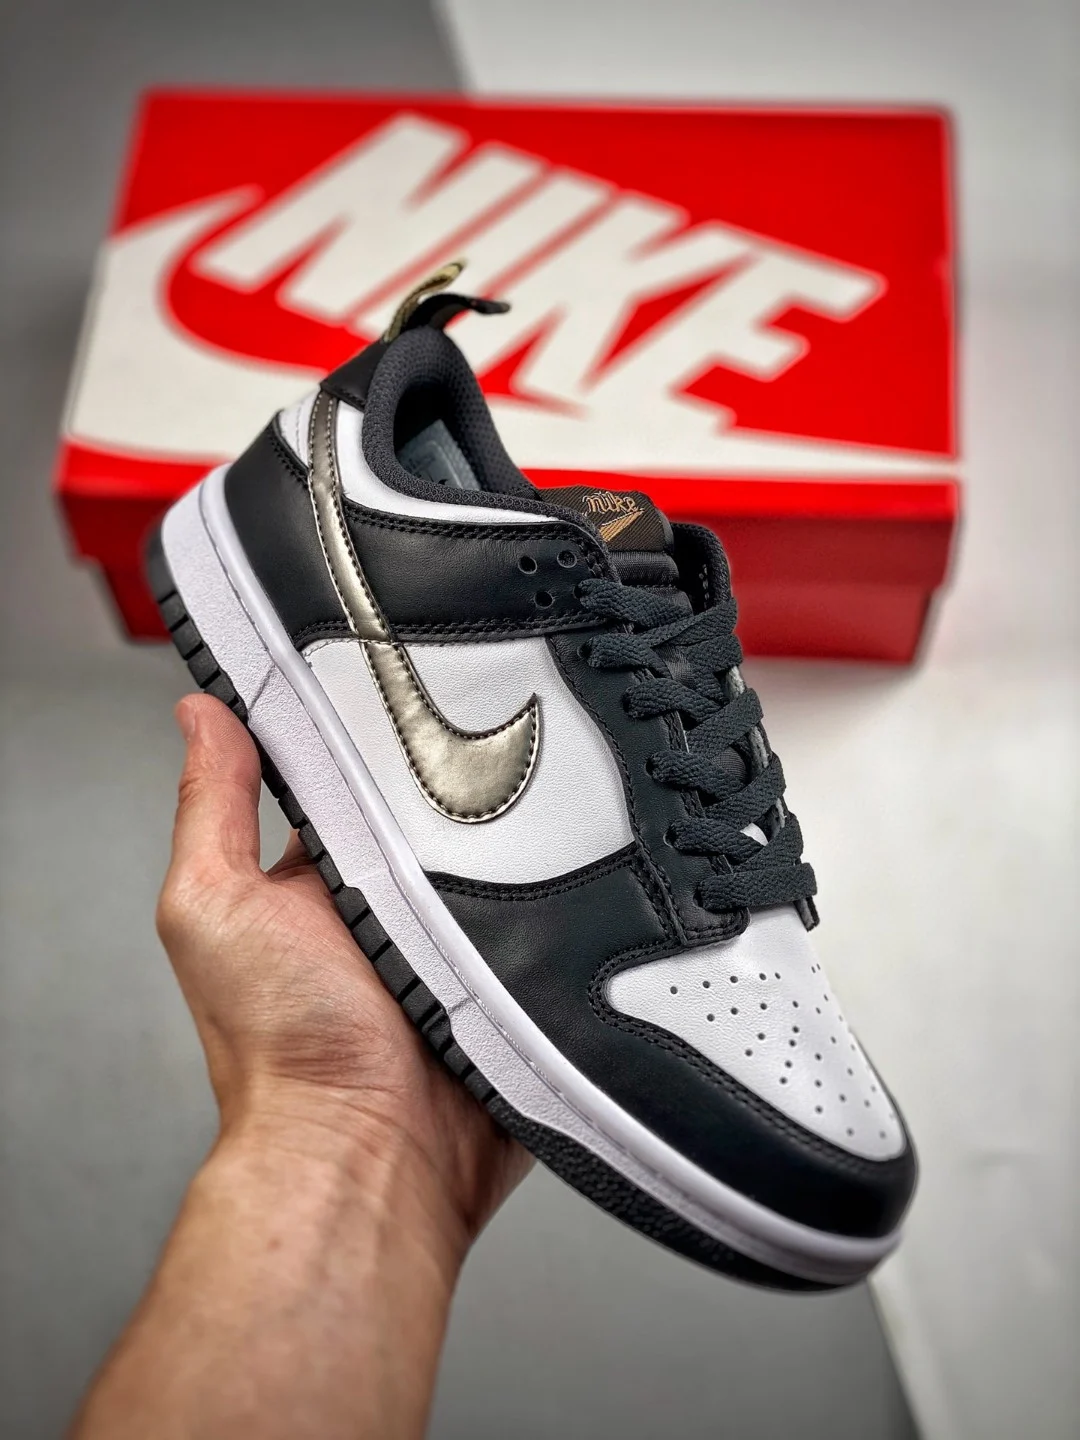 Nike Dunk Low Off Noir White Metallic Gold DH9764-001 For Sale